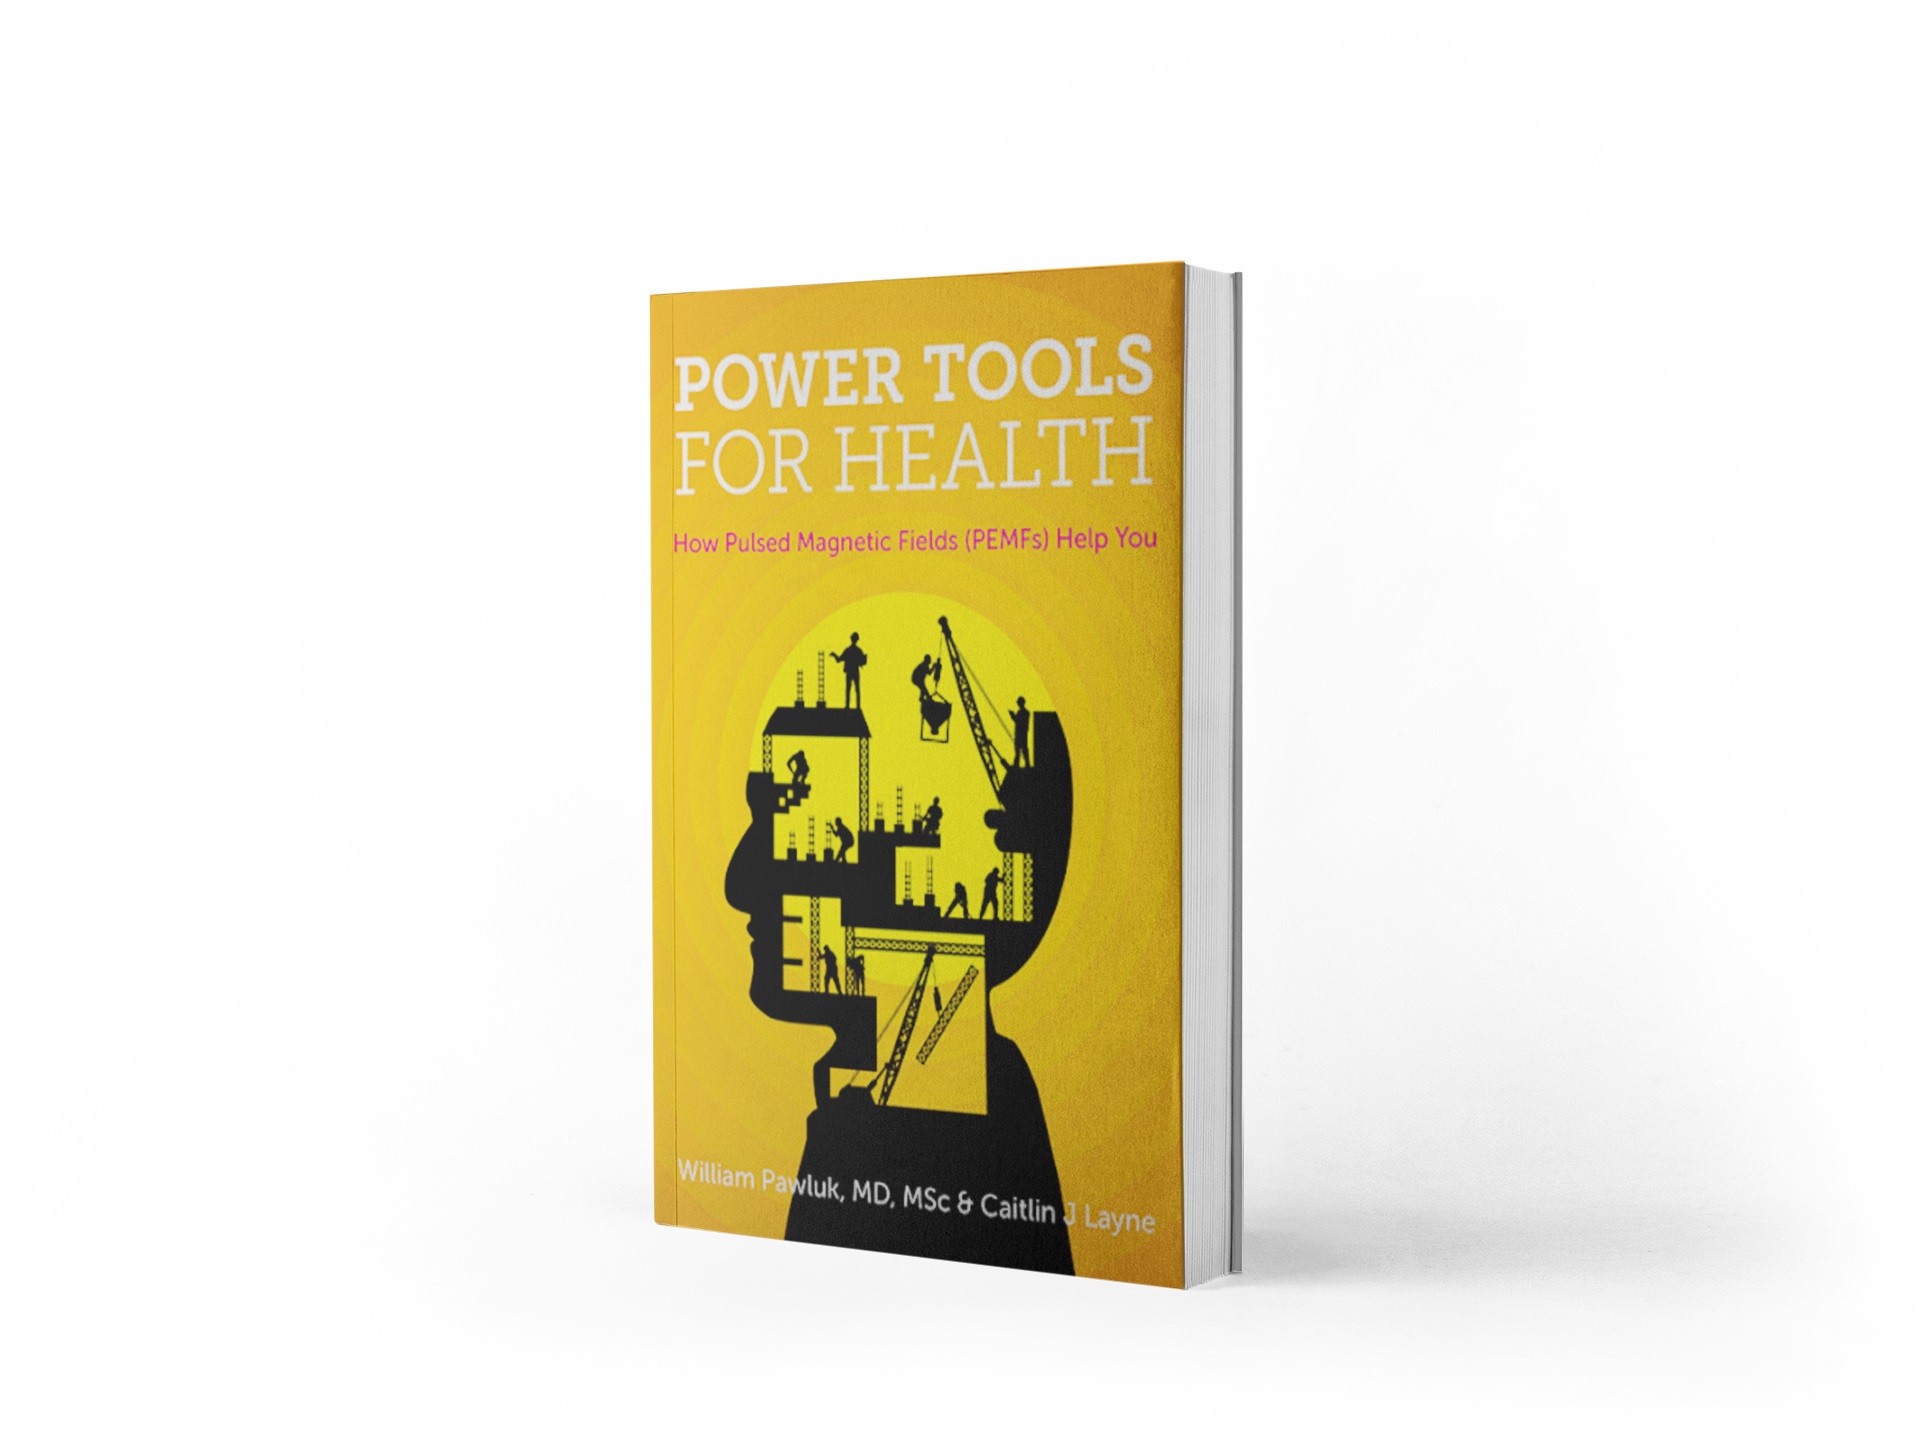 Power Tools for Health - How Pulsed Magnetic Fields (PEMFs) Help You by William Pawluk and Caitlin J Layne | PEMF Education | PEMF Information